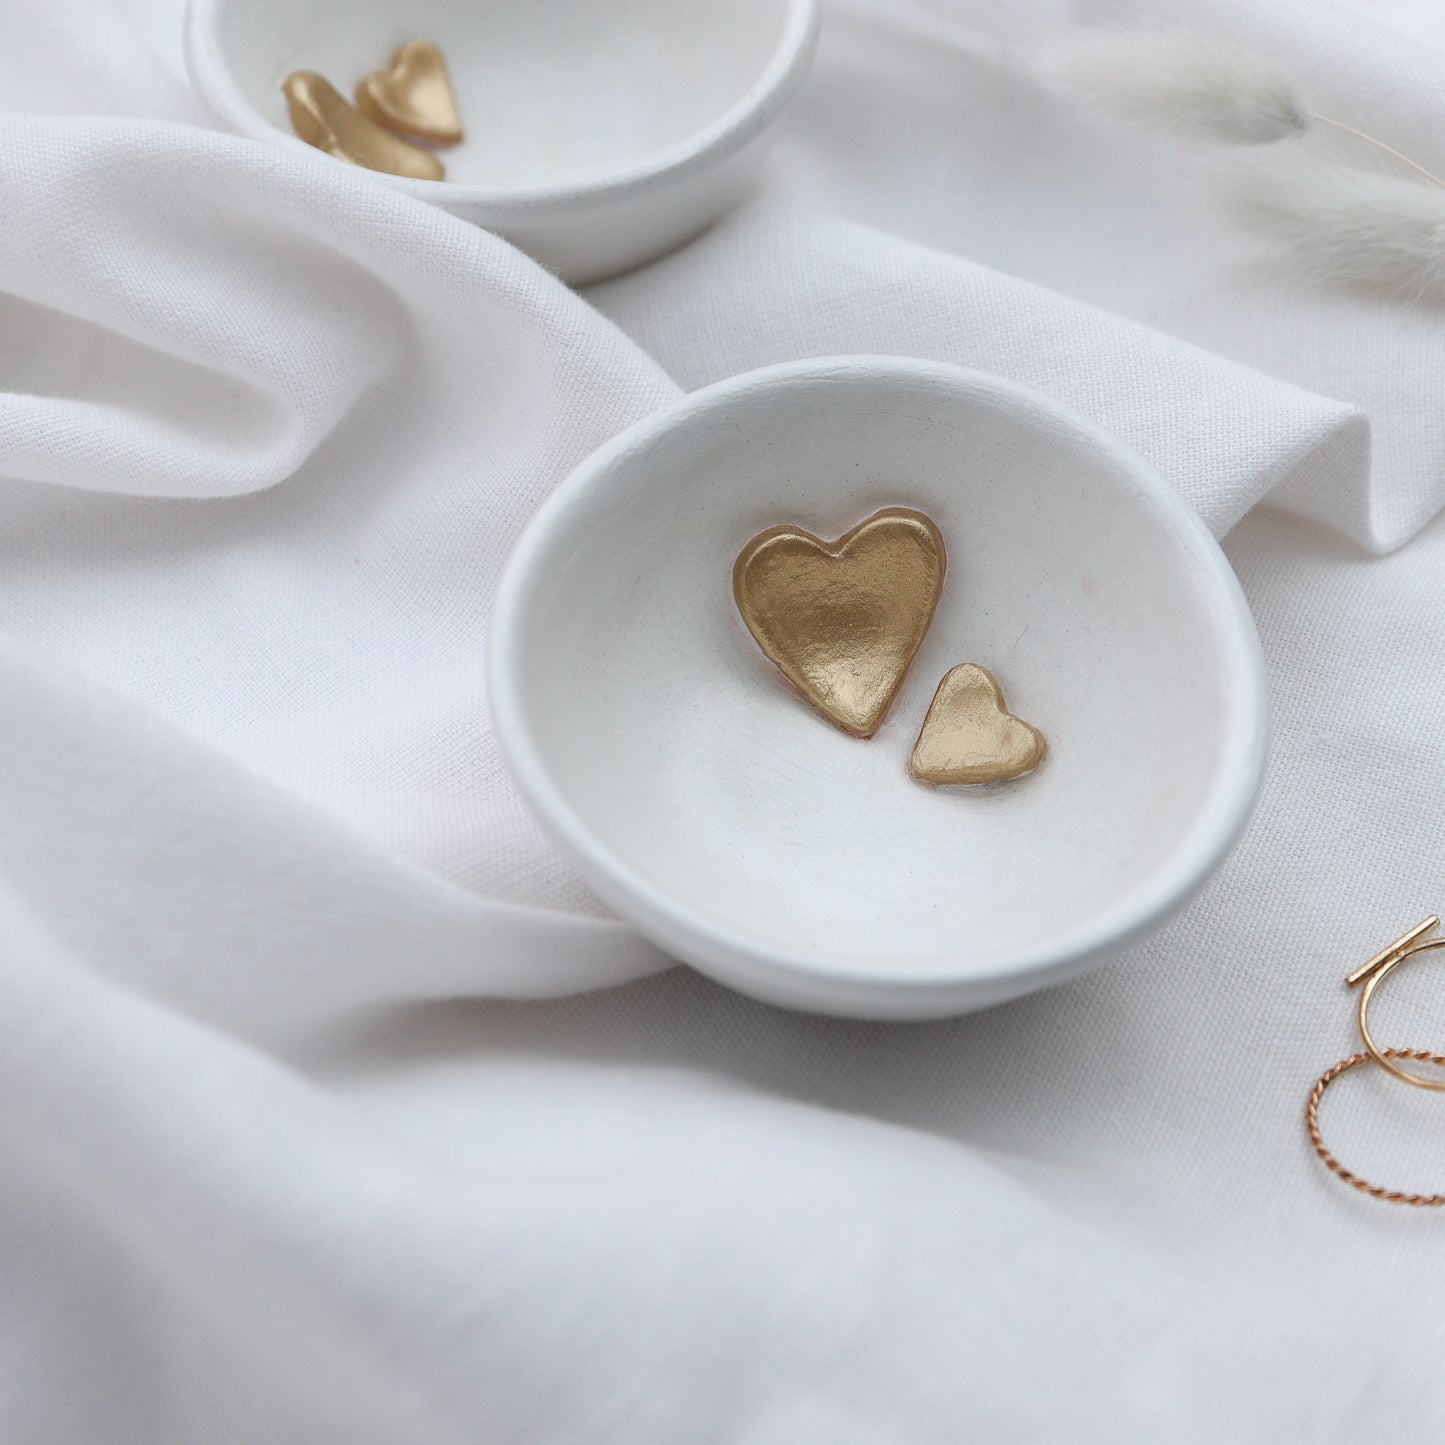 Small white trinket dish with gold hearts